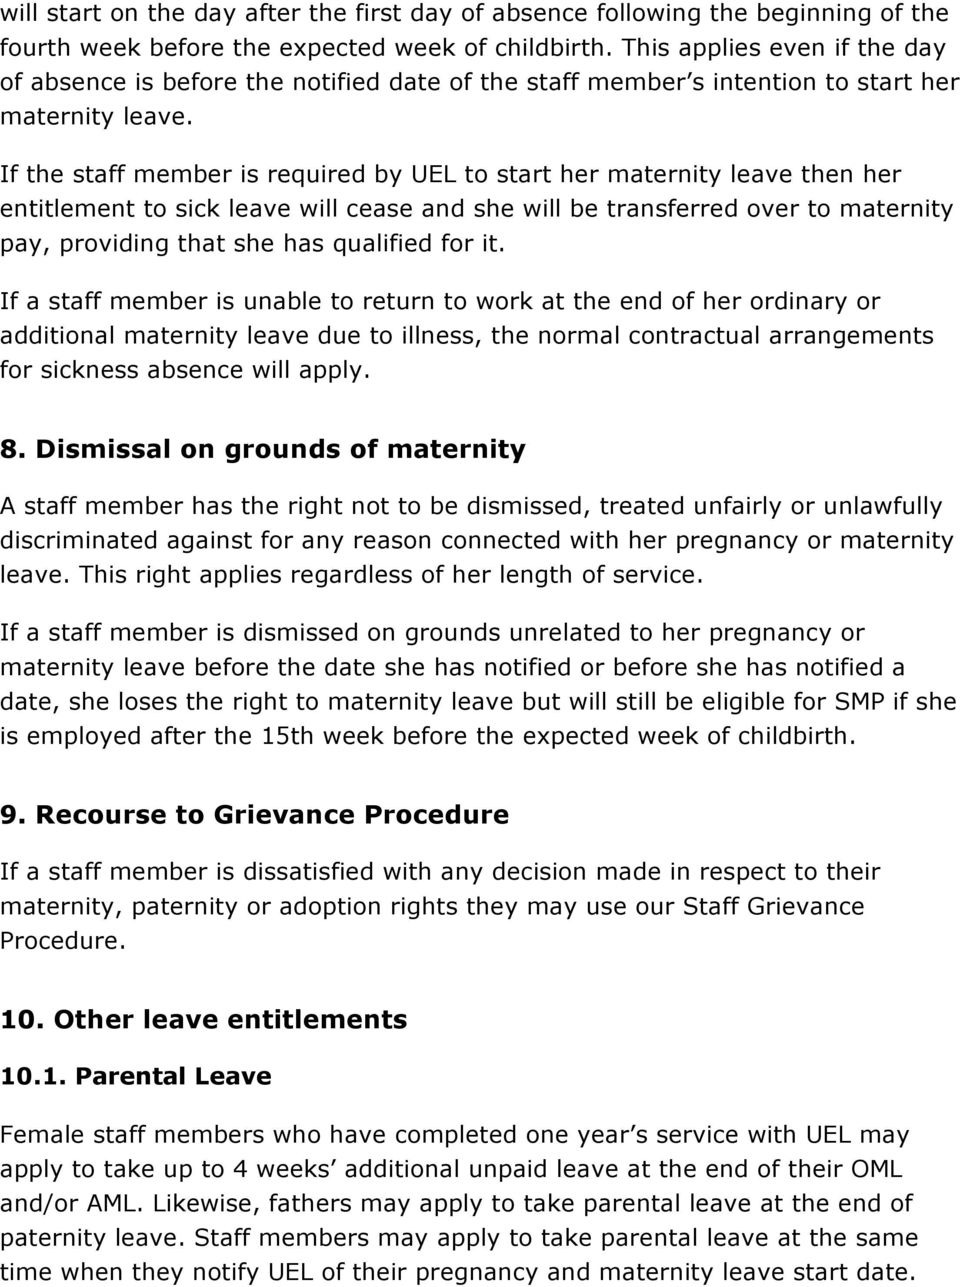 If the staff member is required by UEL to start her maternity leave then her entitlement to sick leave will cease and she will be transferred over to maternity pay, providing that she has qualified